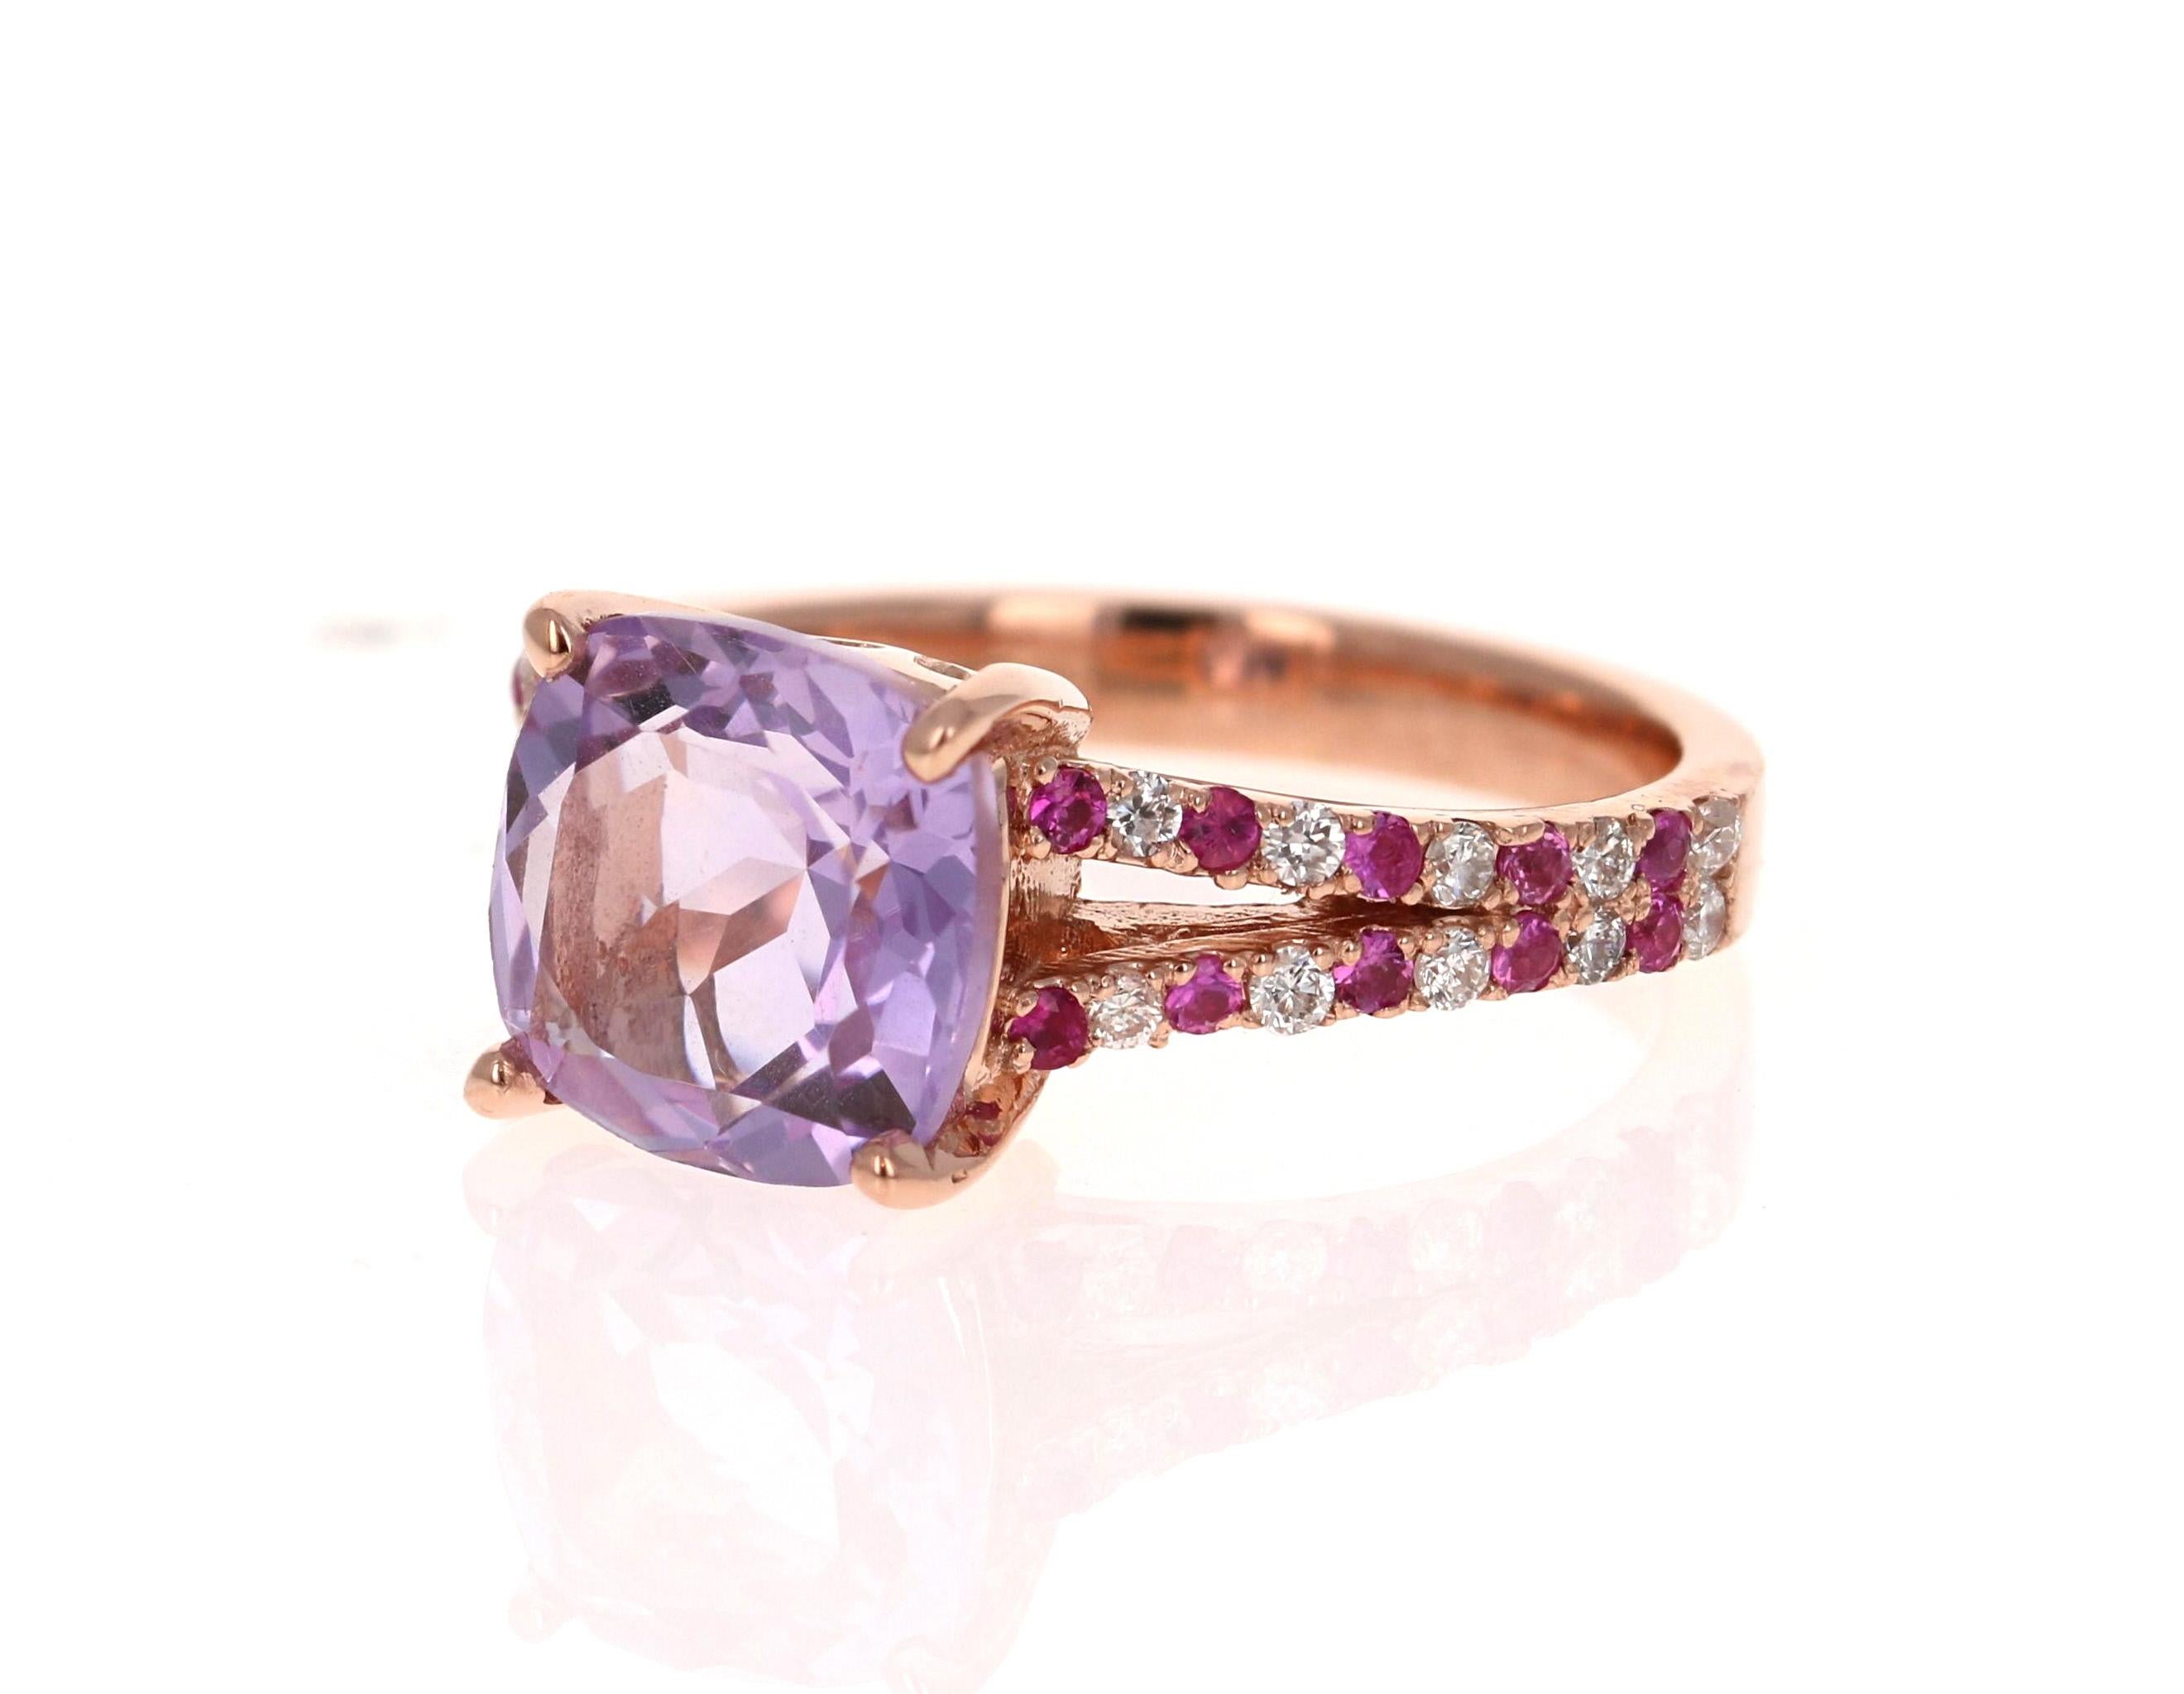 Amethyst and Pink Sapphire Ring! 

This cute and dainty Ring has a Cushion Cut Amethyst that weighs 2.90 Carats and is embellished with alternating 20 Pink Sapphires that weigh 0.33 Carats and 20 Round Cut Diamonds that weigh 0.24 Carats along the